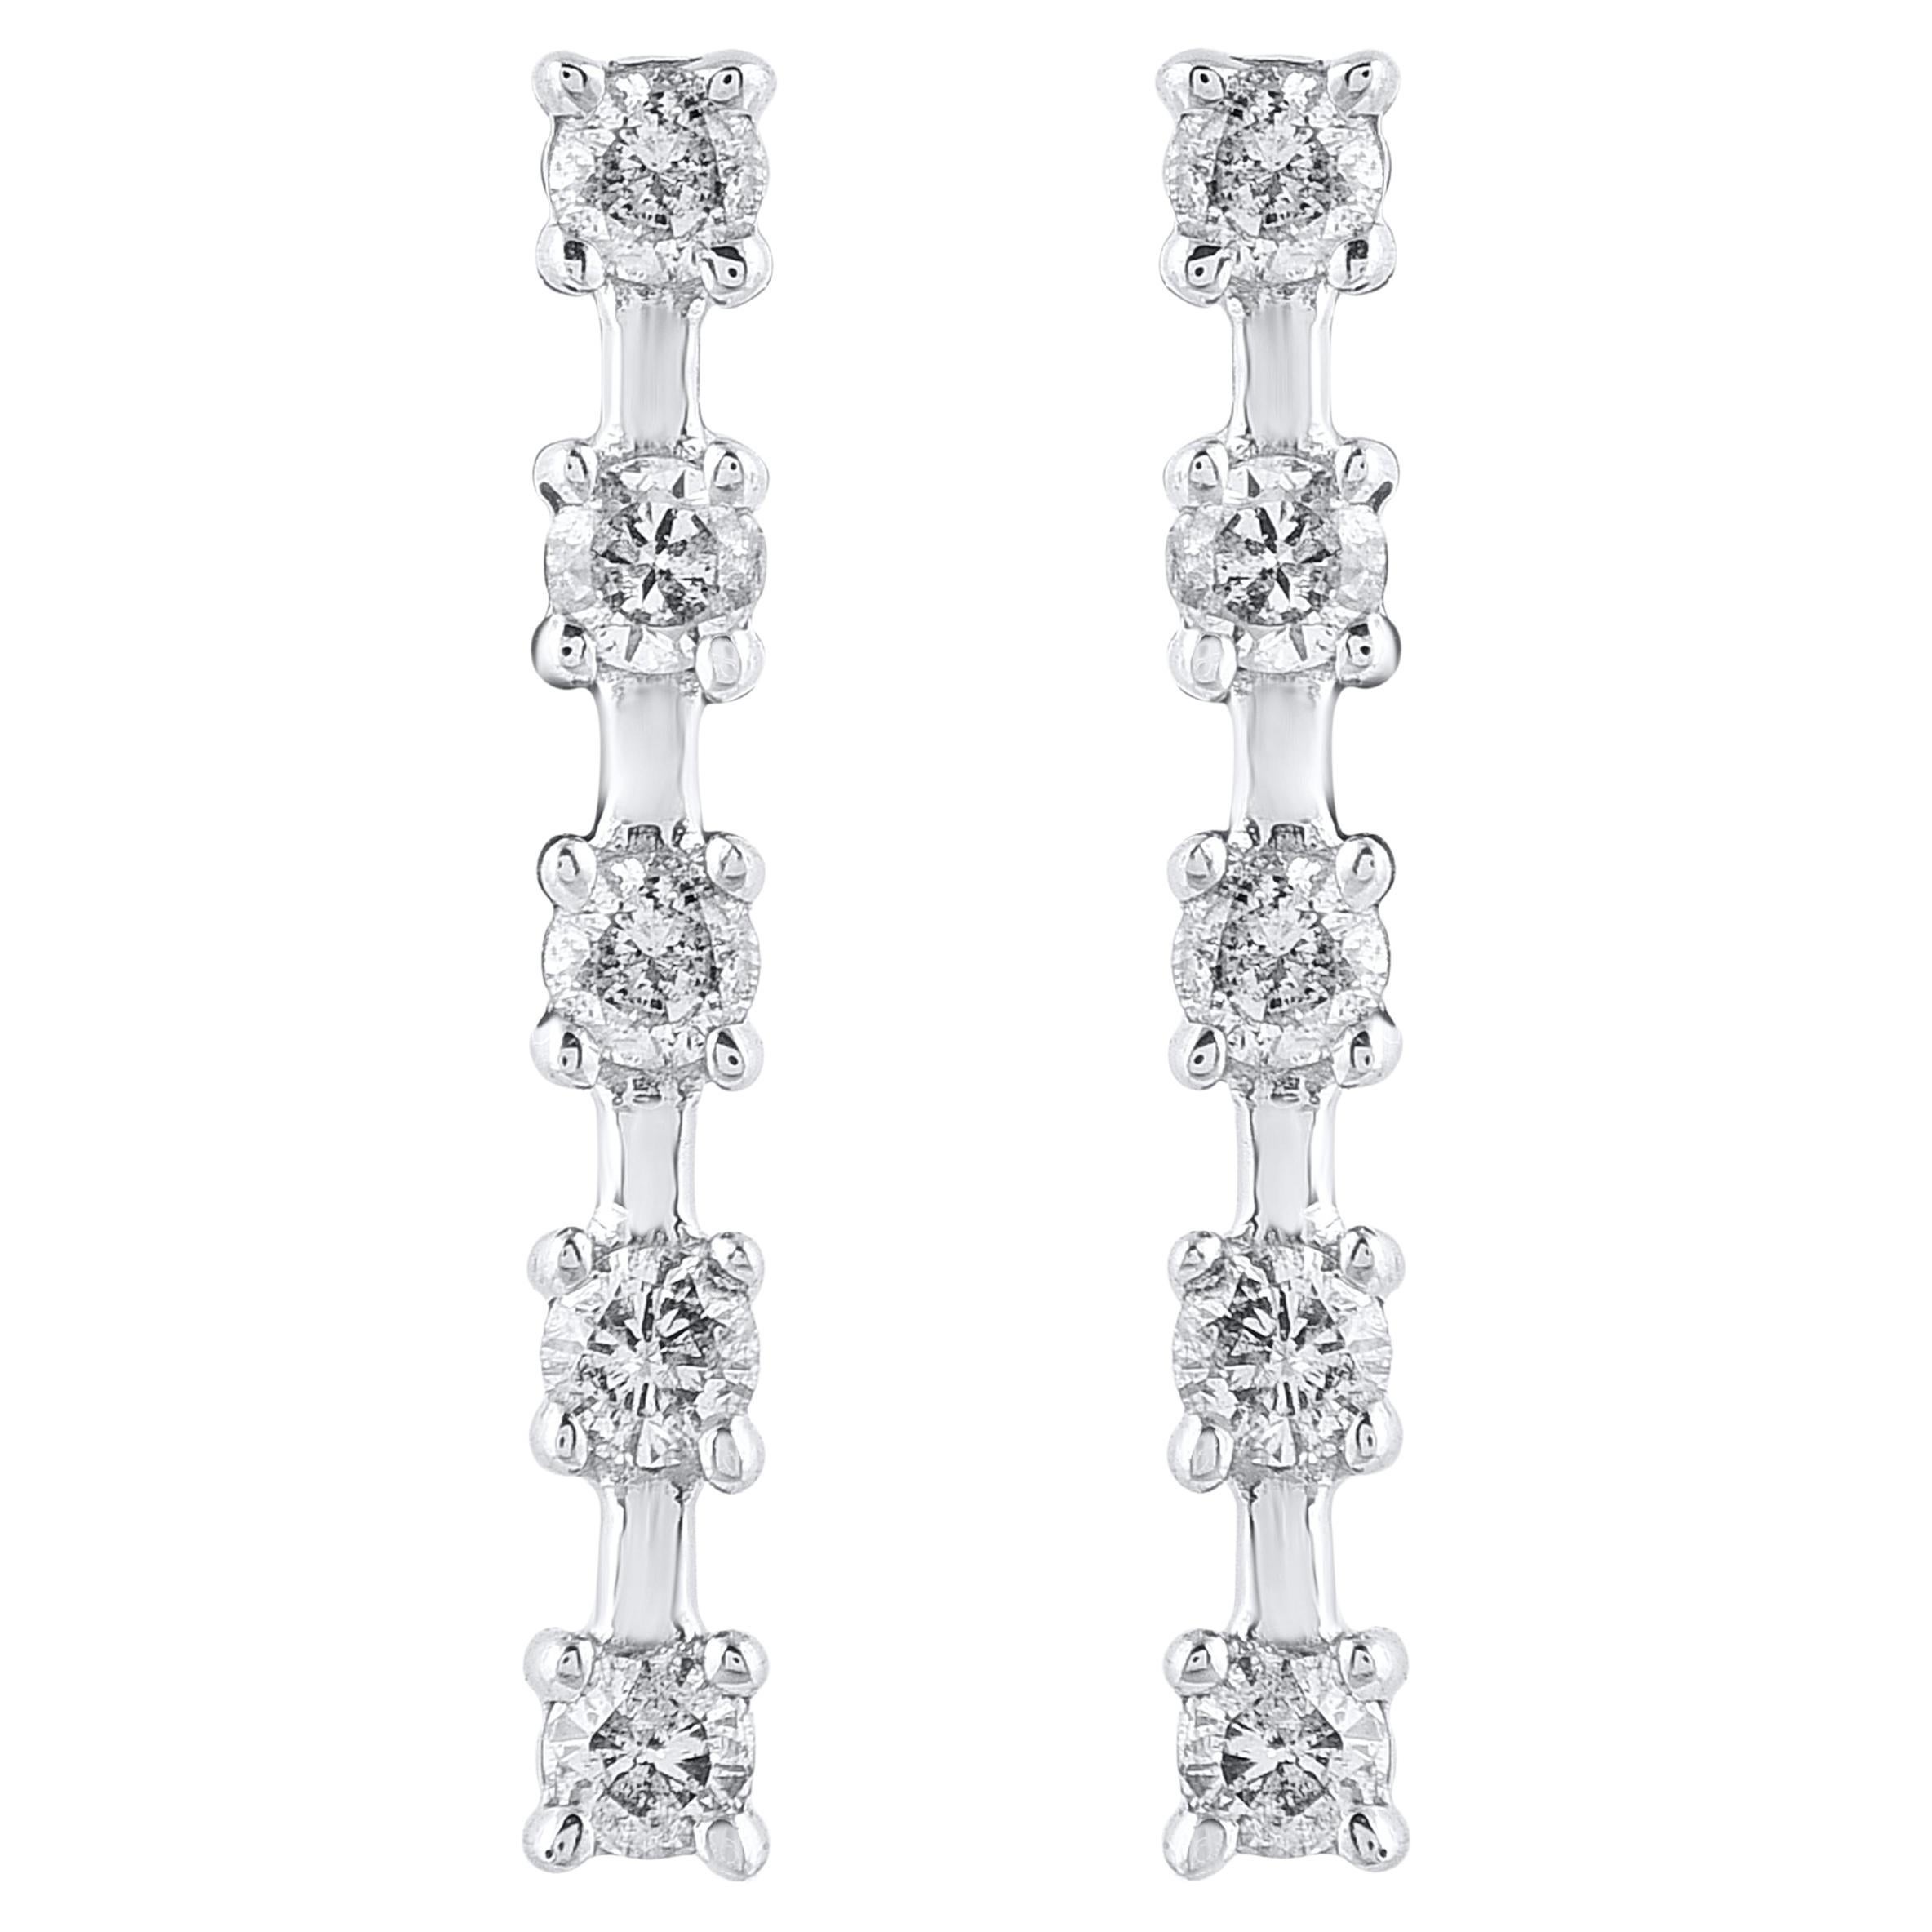 Timeless and elegant, these diamond drop earrings go from day to night with ease. This earring is beautifully designed and studded with 10 brilliant cut natural diamond set in prong setting. The total diamond weight is 0.15 carat. The diamonds are